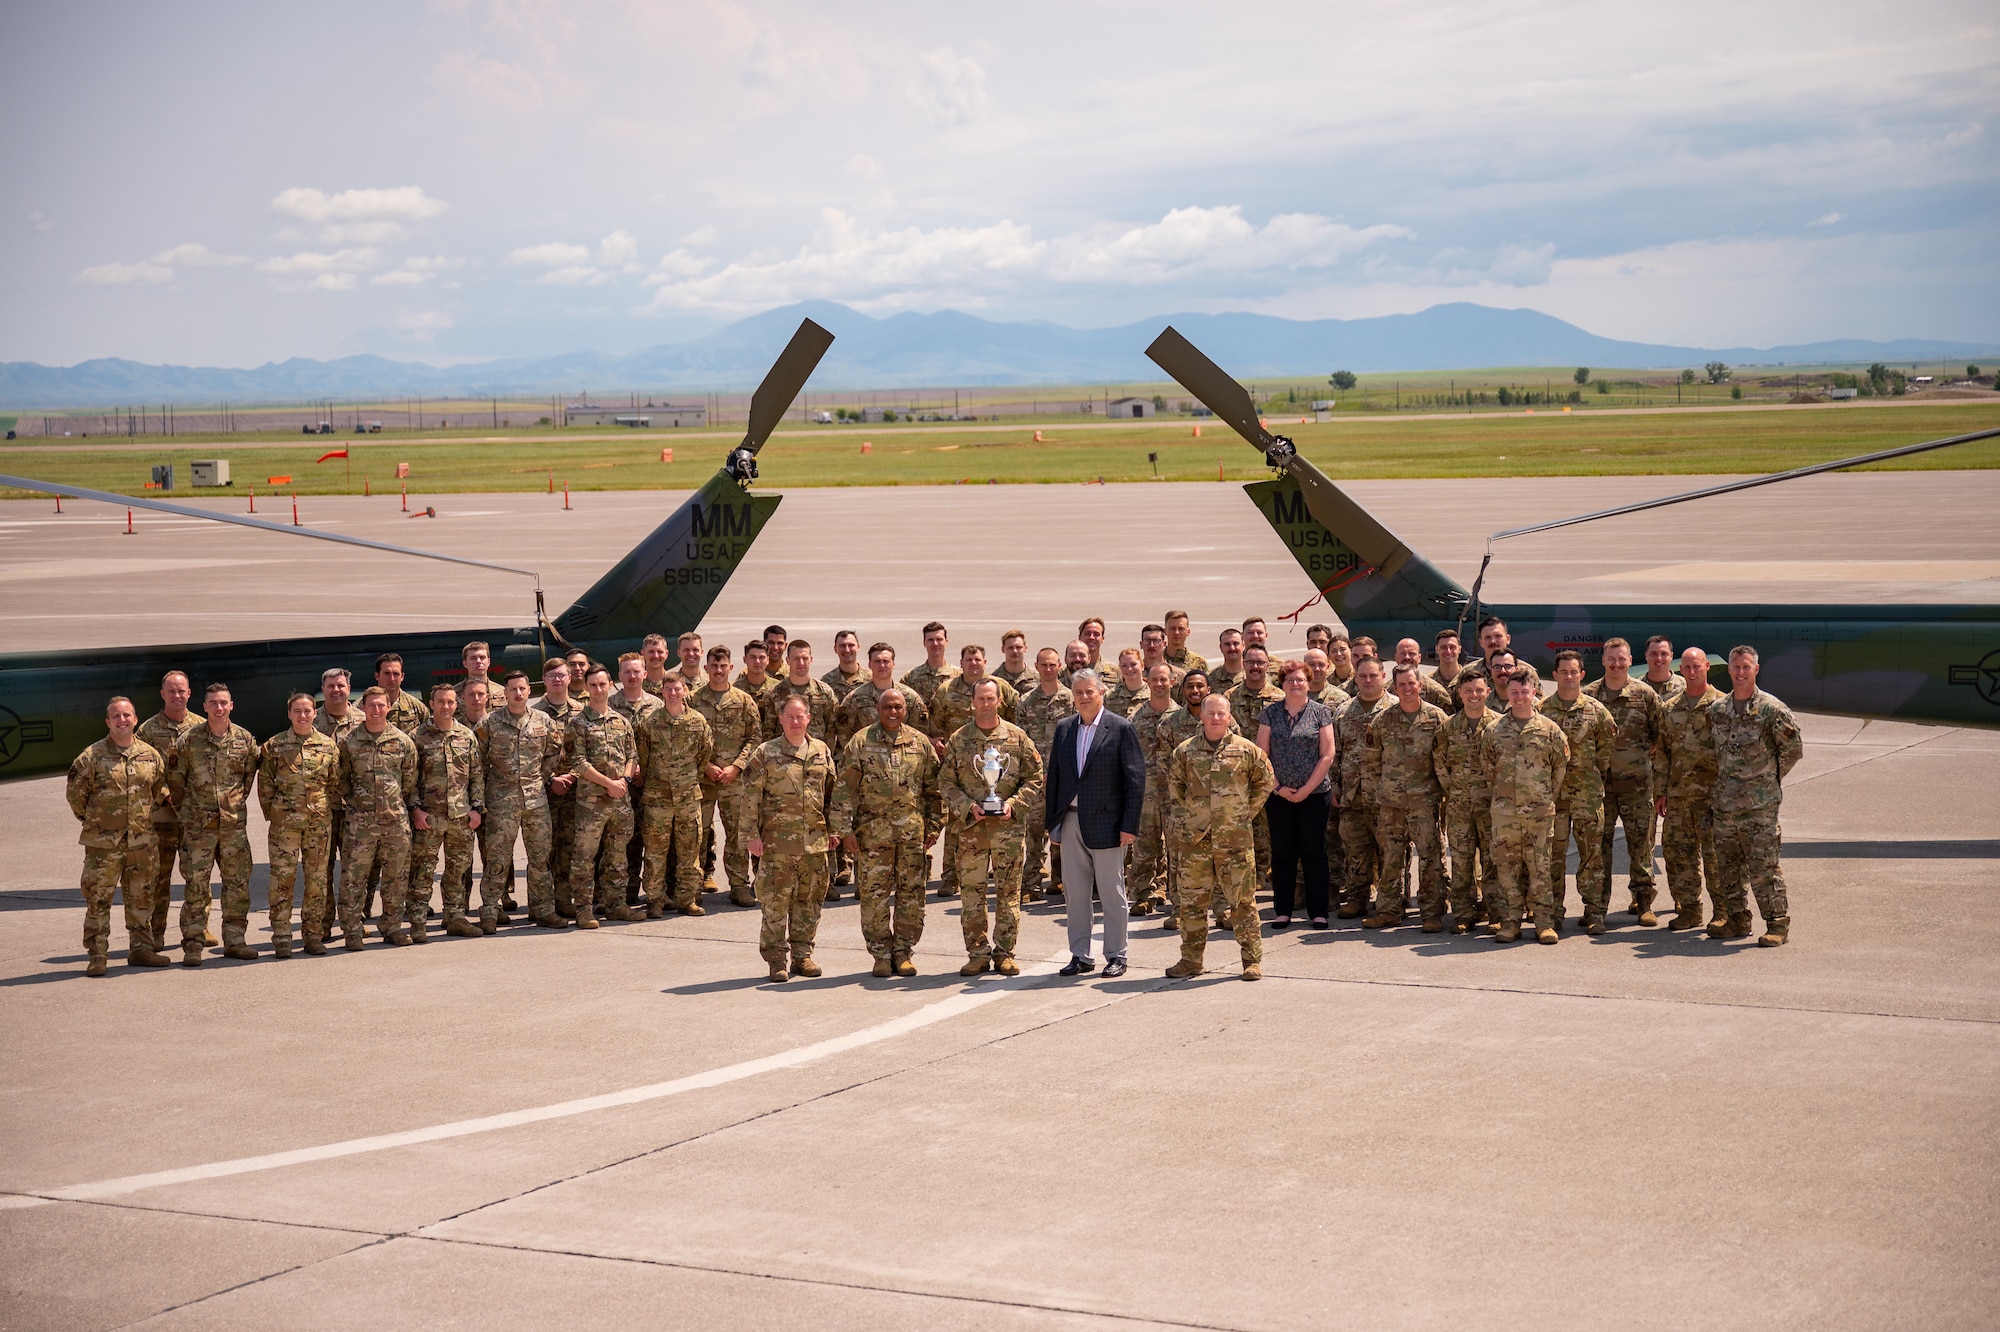 A large group of military members in uniform stand in formation in front of the tails of two helicopters.